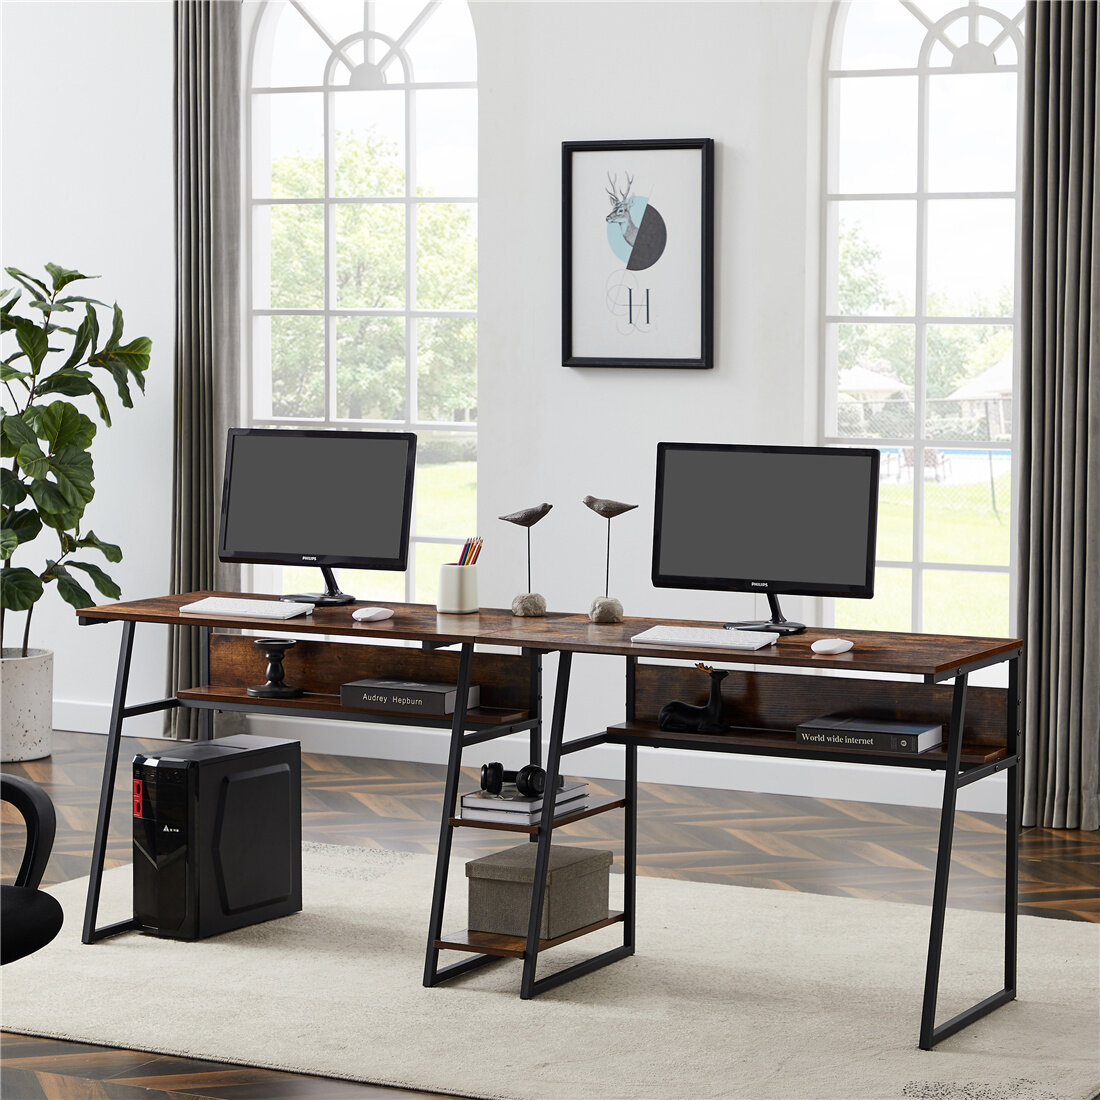 Details about   Modern Computer Desk Laptop Desktop Study Writing Dining Table Home Office 